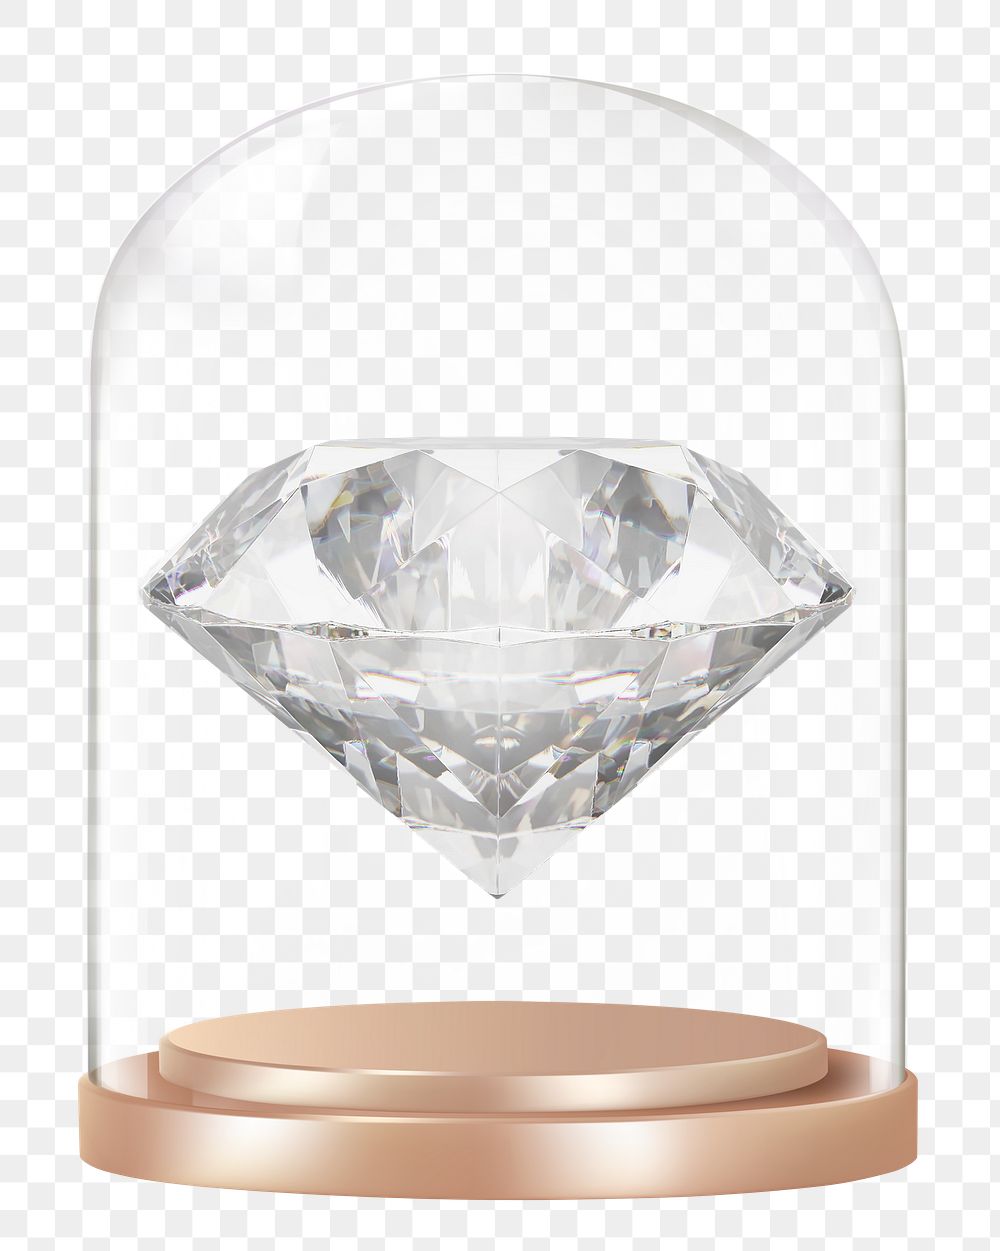 Luxurious diamond png glass dome sticker, jewelry concept art, transparent background